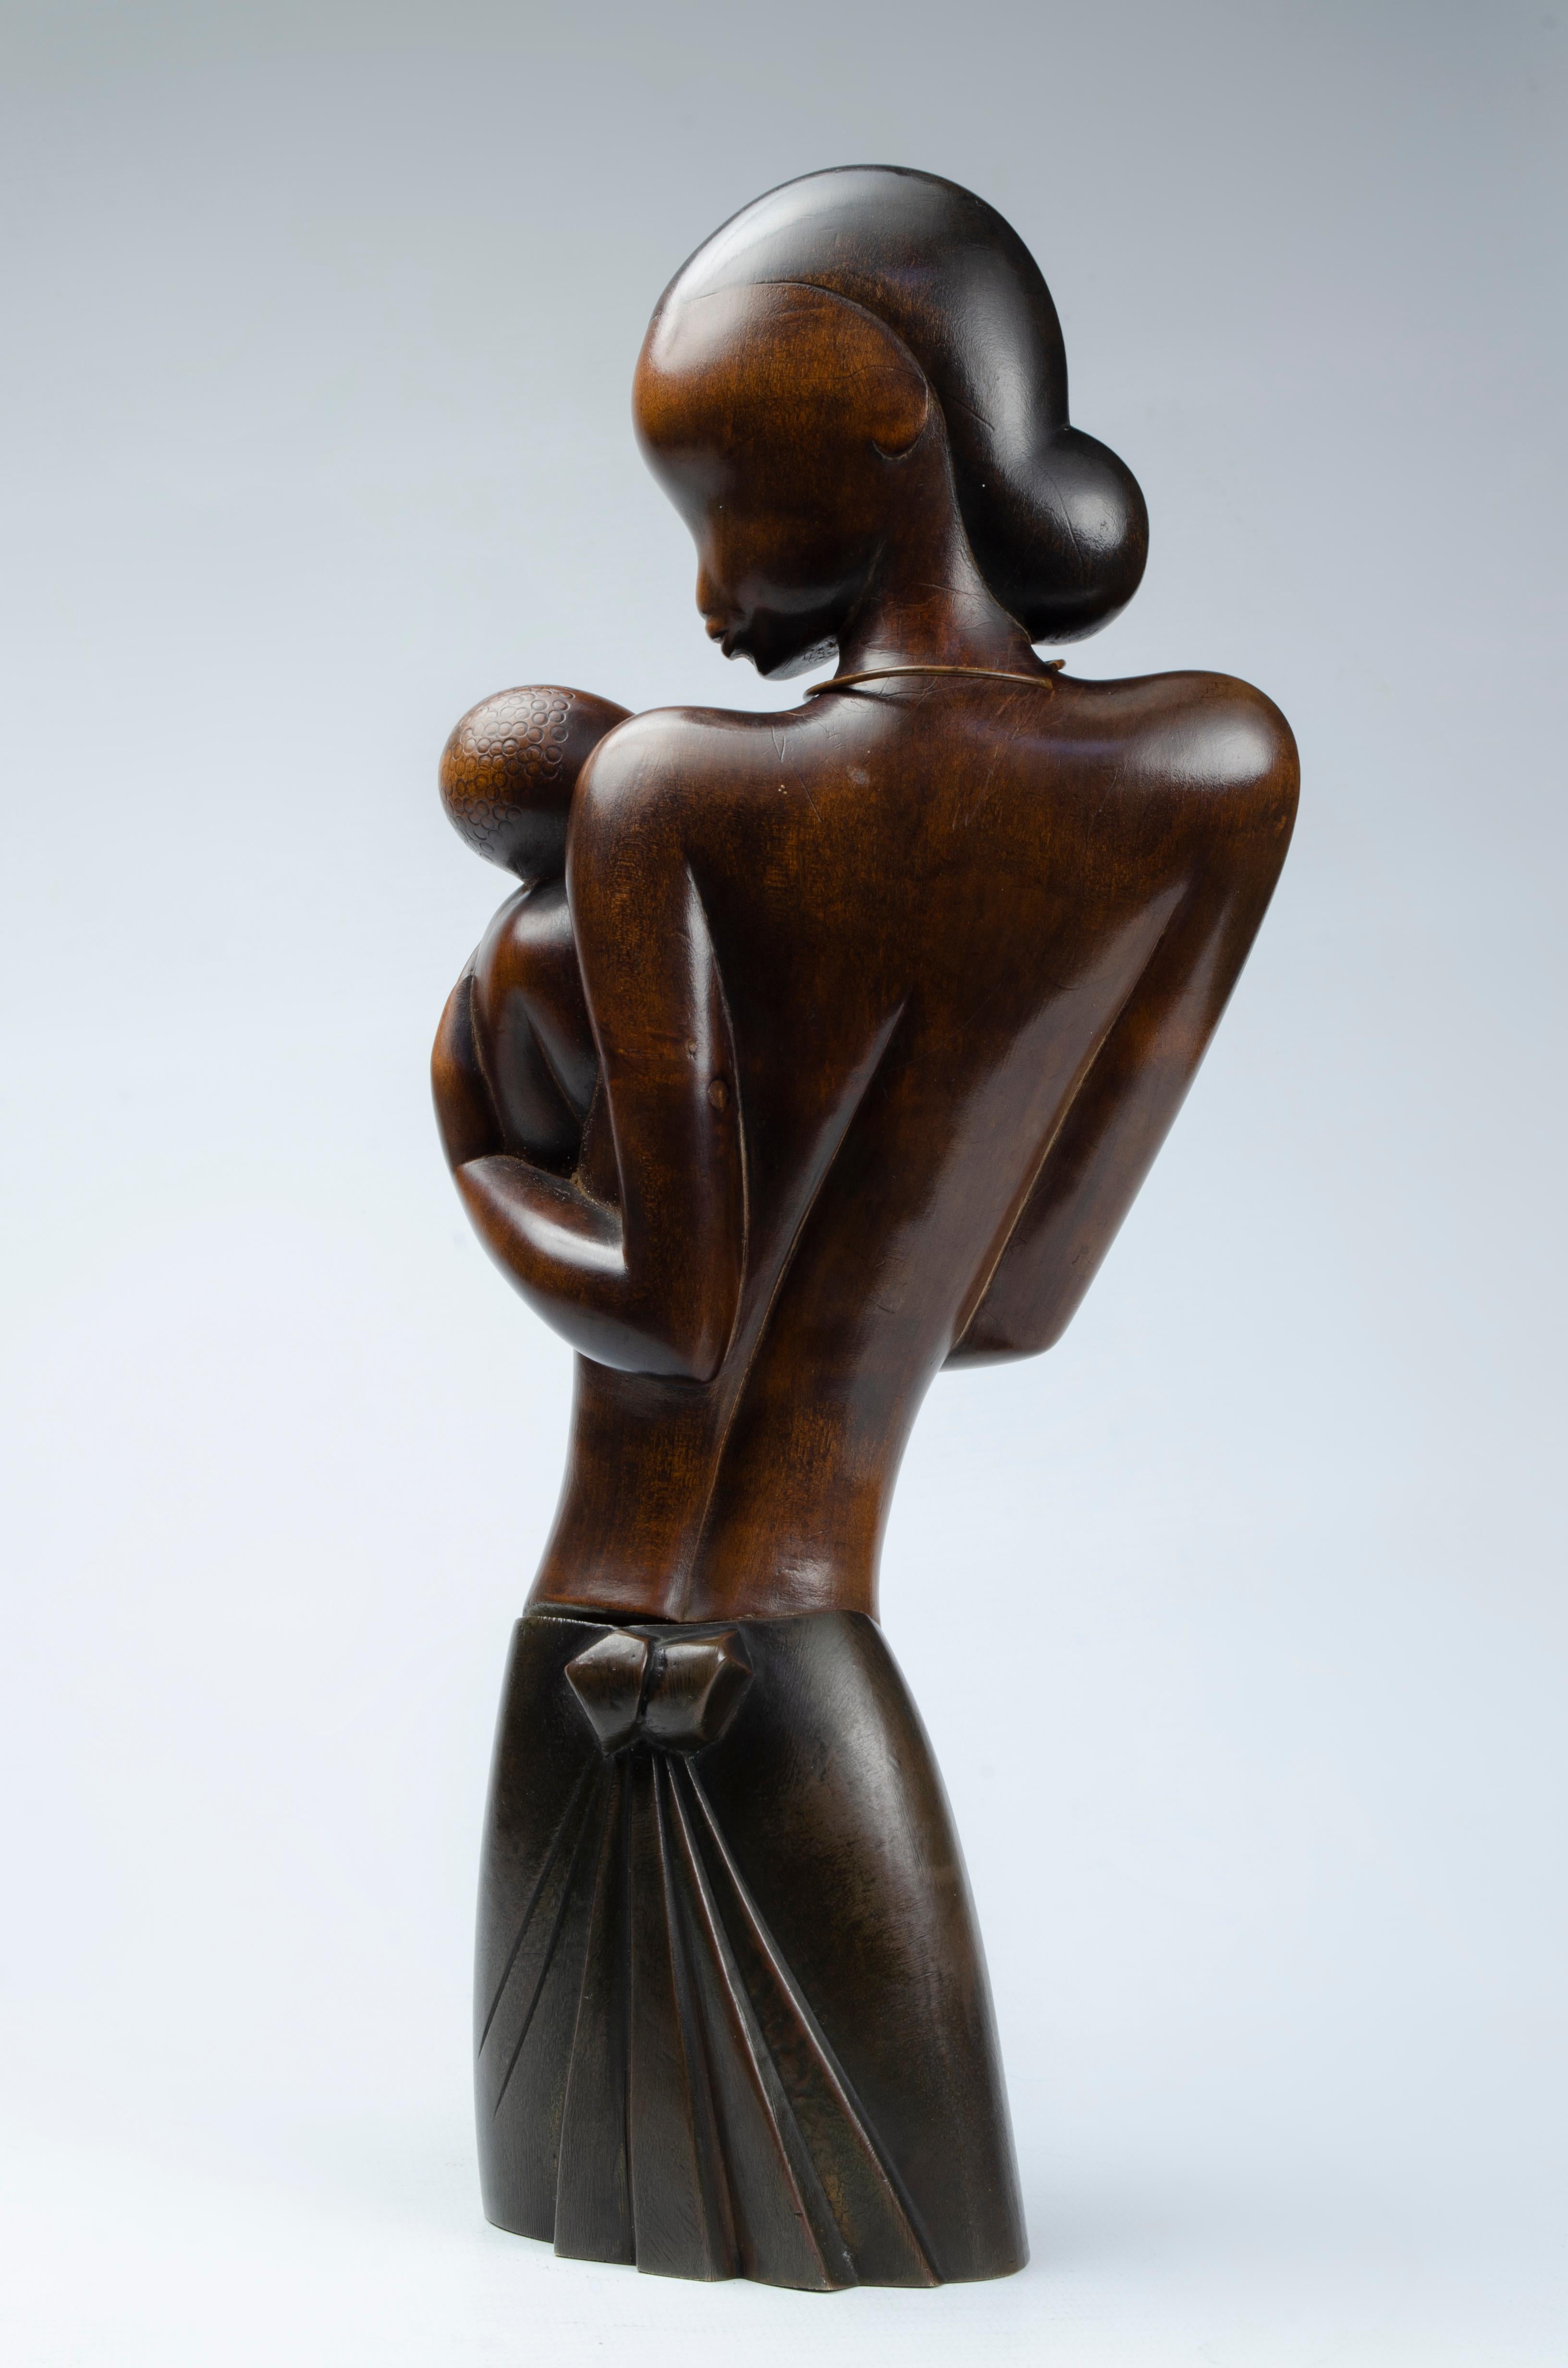 Haguenauer art deco sculpture.
mother with child.
solid bronze and ebonized wood.
Sealed atelier Haguenauer.
Viennese session wHw.
patinated bronze base and wooden top.
The woman is copper colored.
original patina.
Only minor signs of use.
Karl